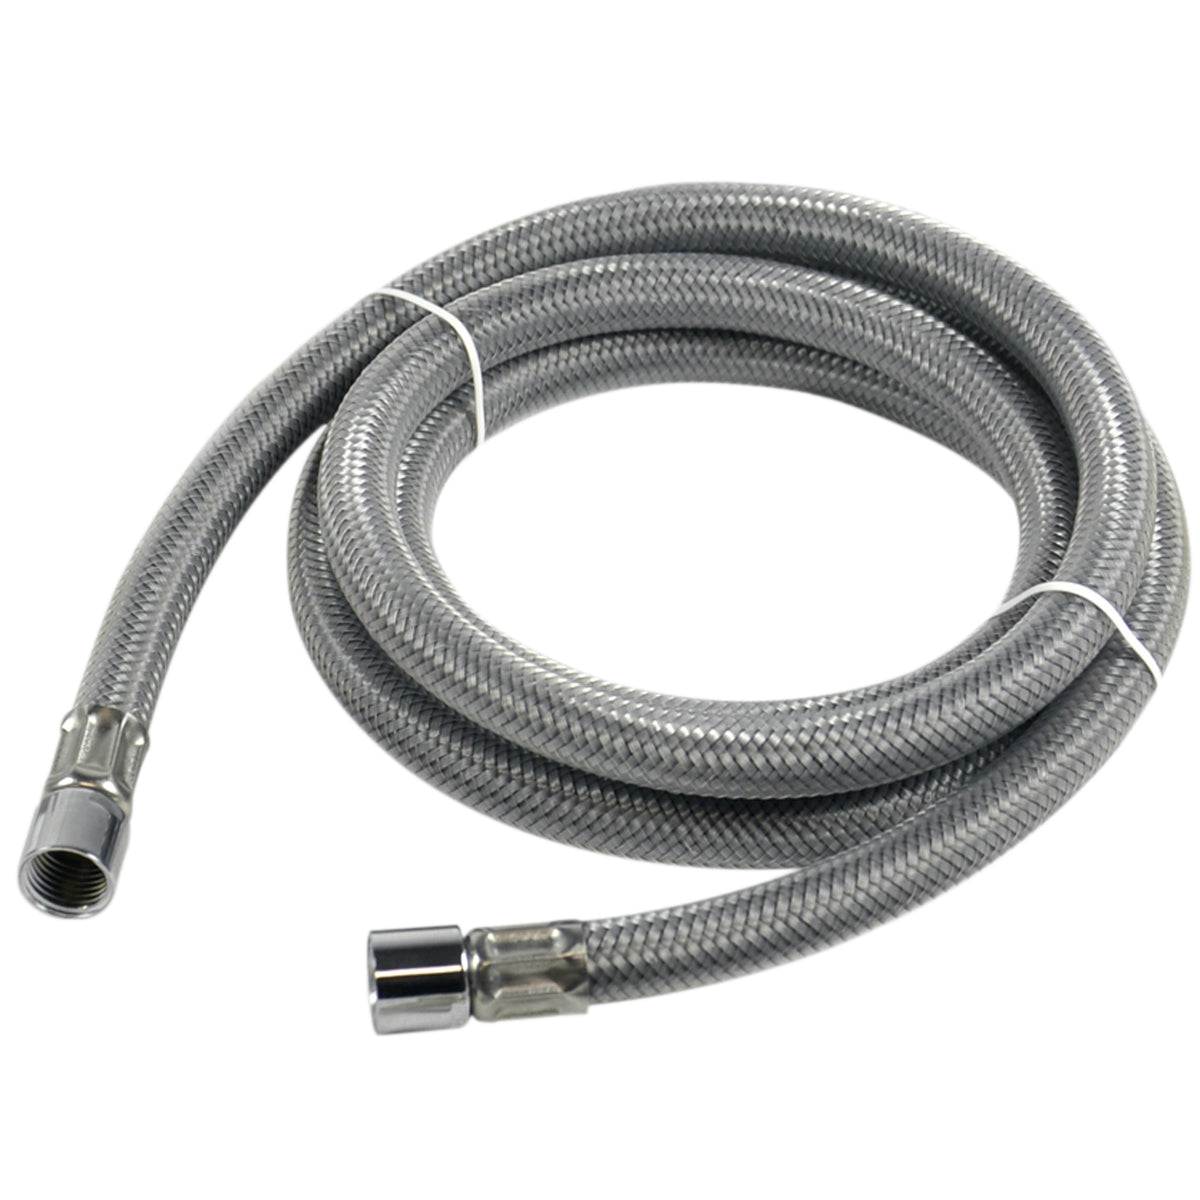 Danco 10912 Faucet Pull-Out Spray Hose for Kitchen Pullout Heads, Gray, 57"